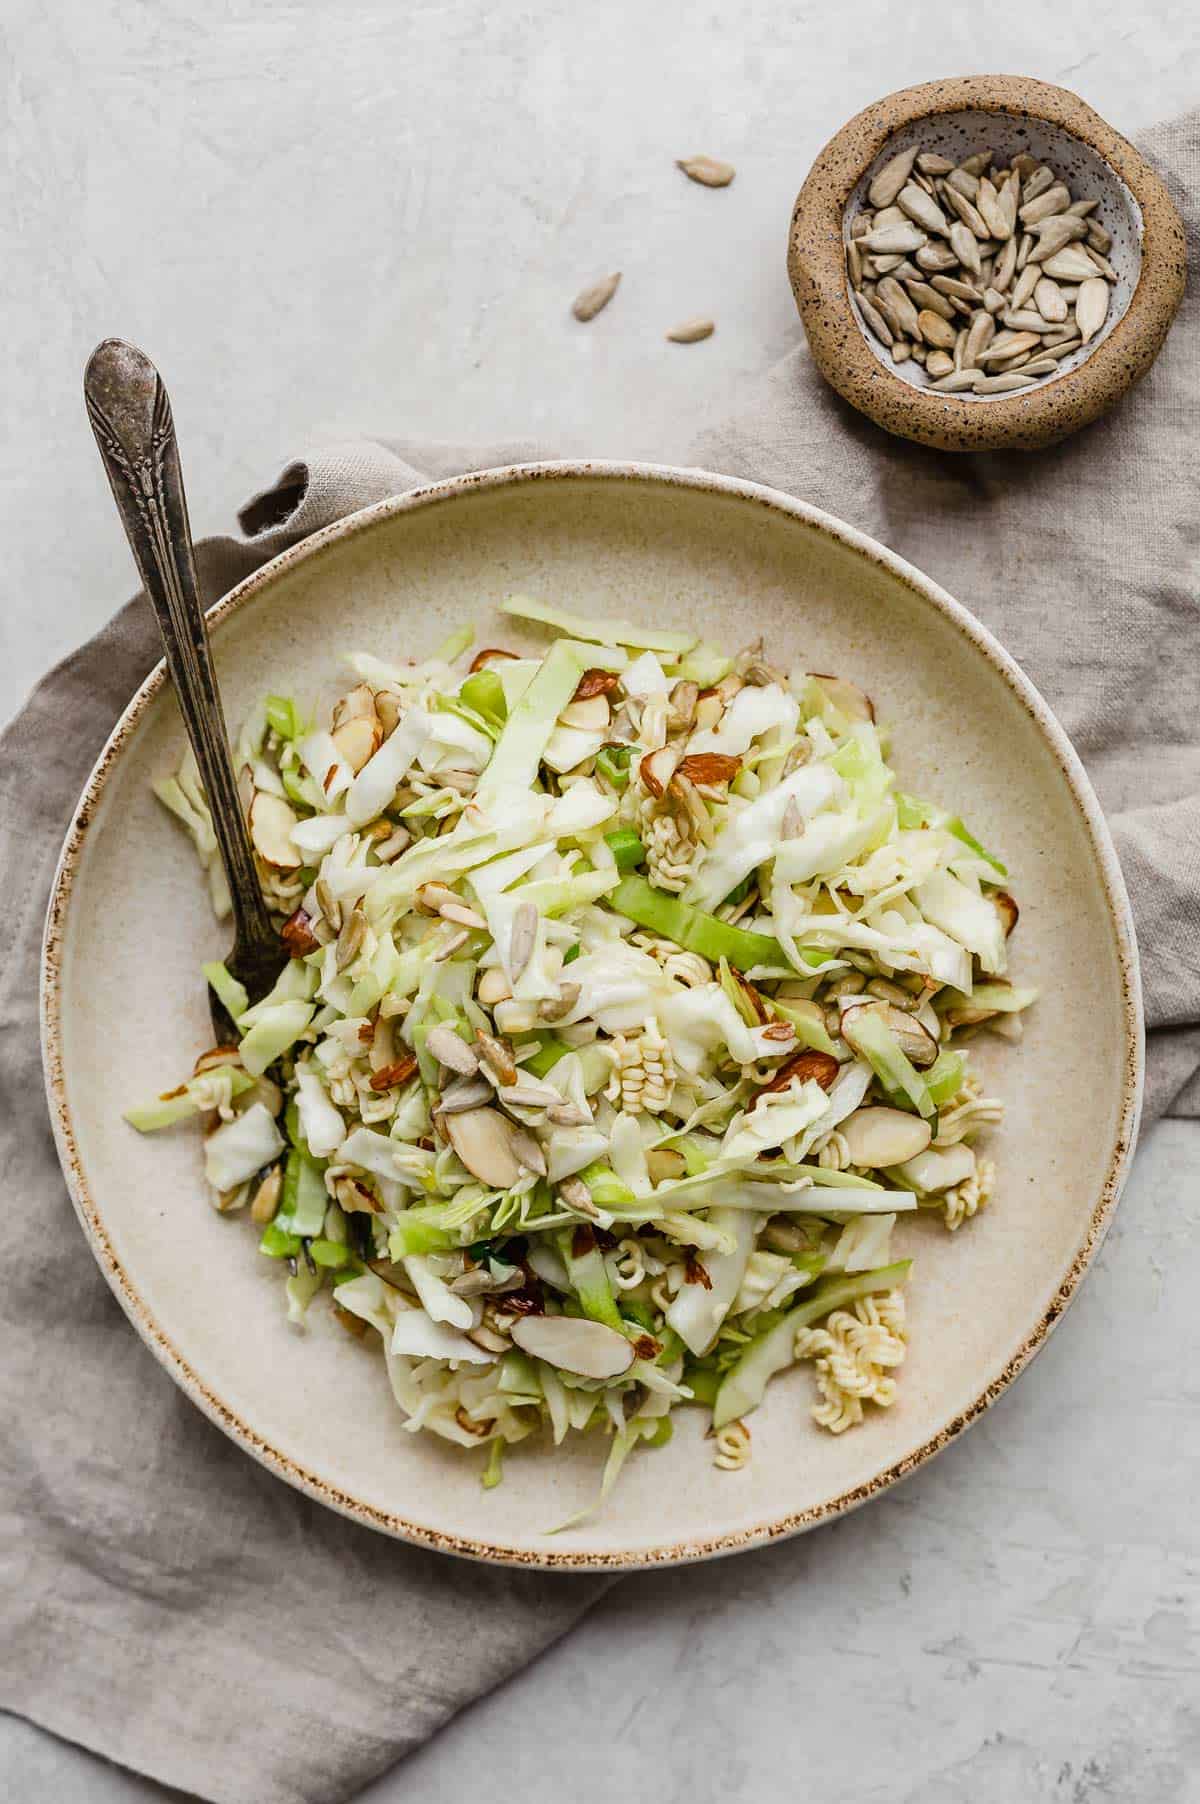 Crunchy Cabbage Salad in a tan pasta bowl on a gray background.